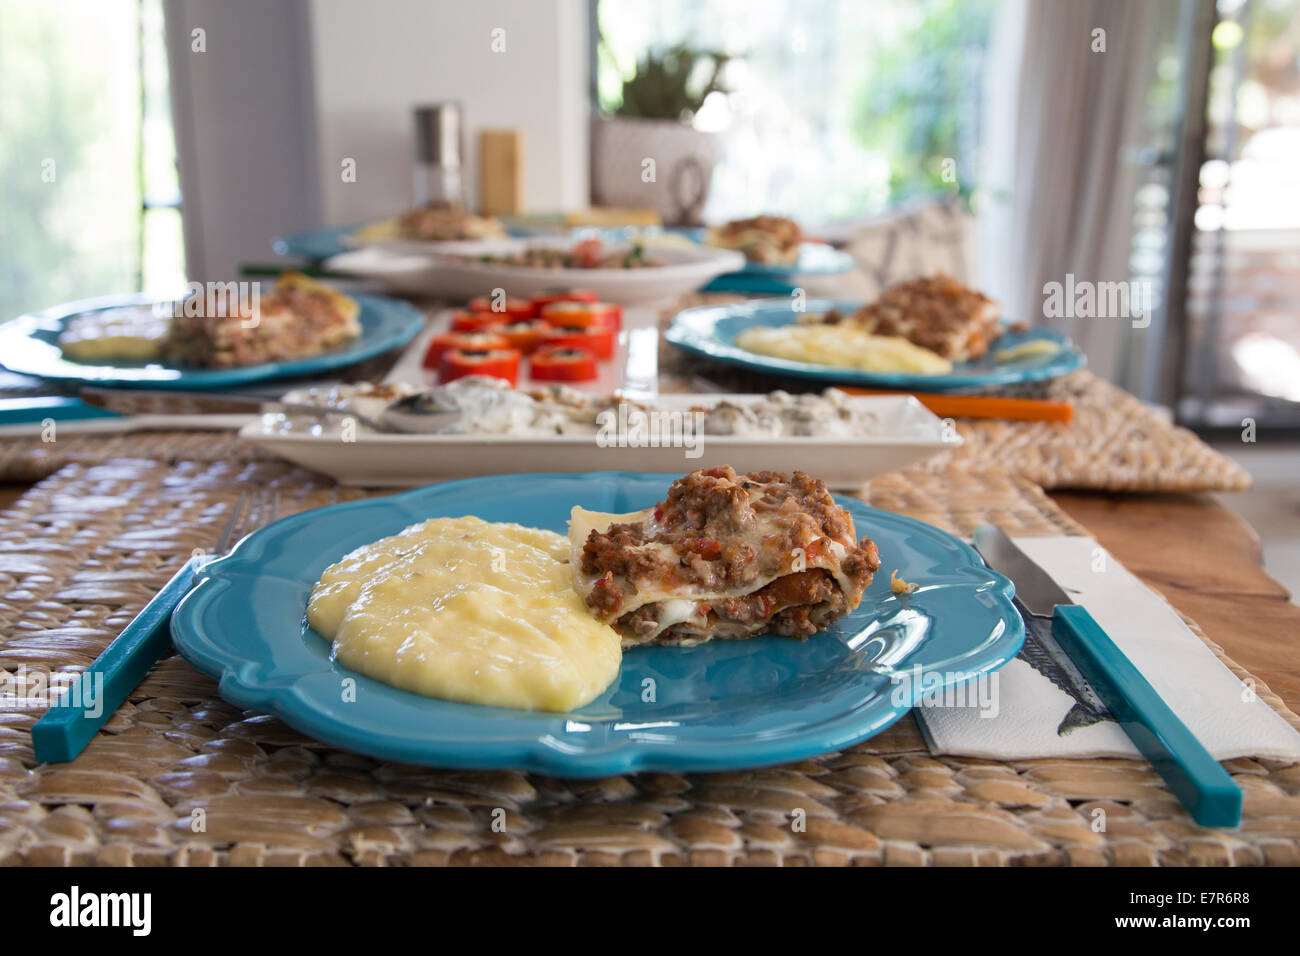 Homemade Lasagna and Mashed Potatoes in a Plate on the Dining Table Stock Photo